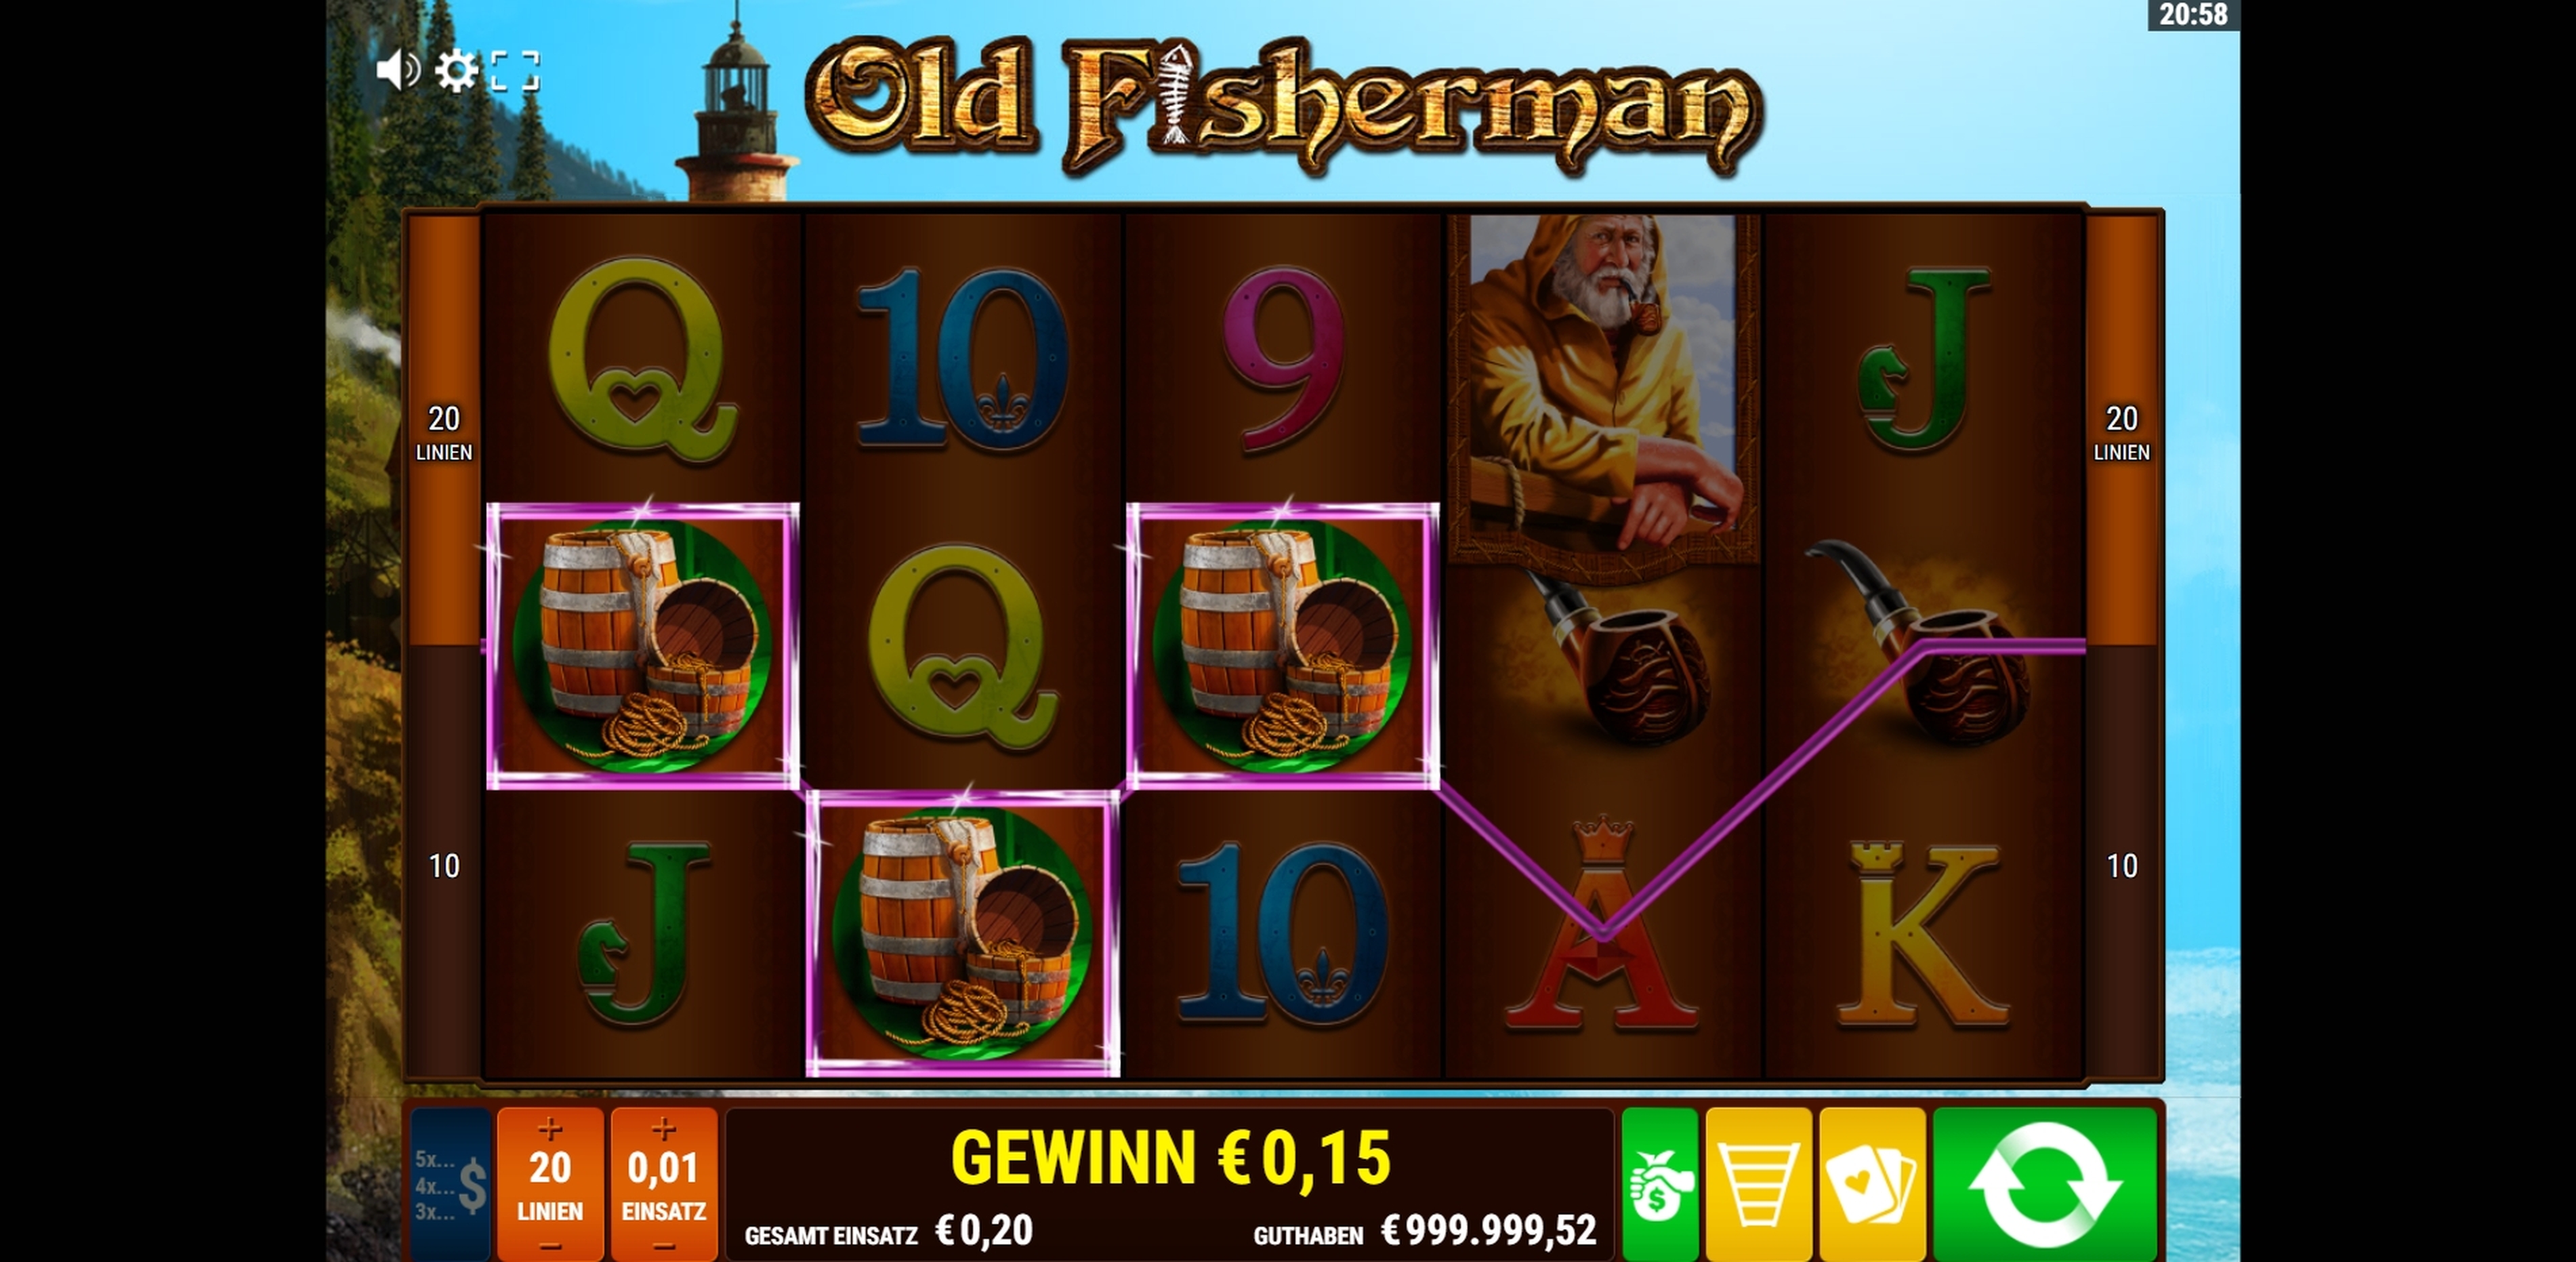 Win Money in Old Fisherman Free Slot Game by Bally Wulff